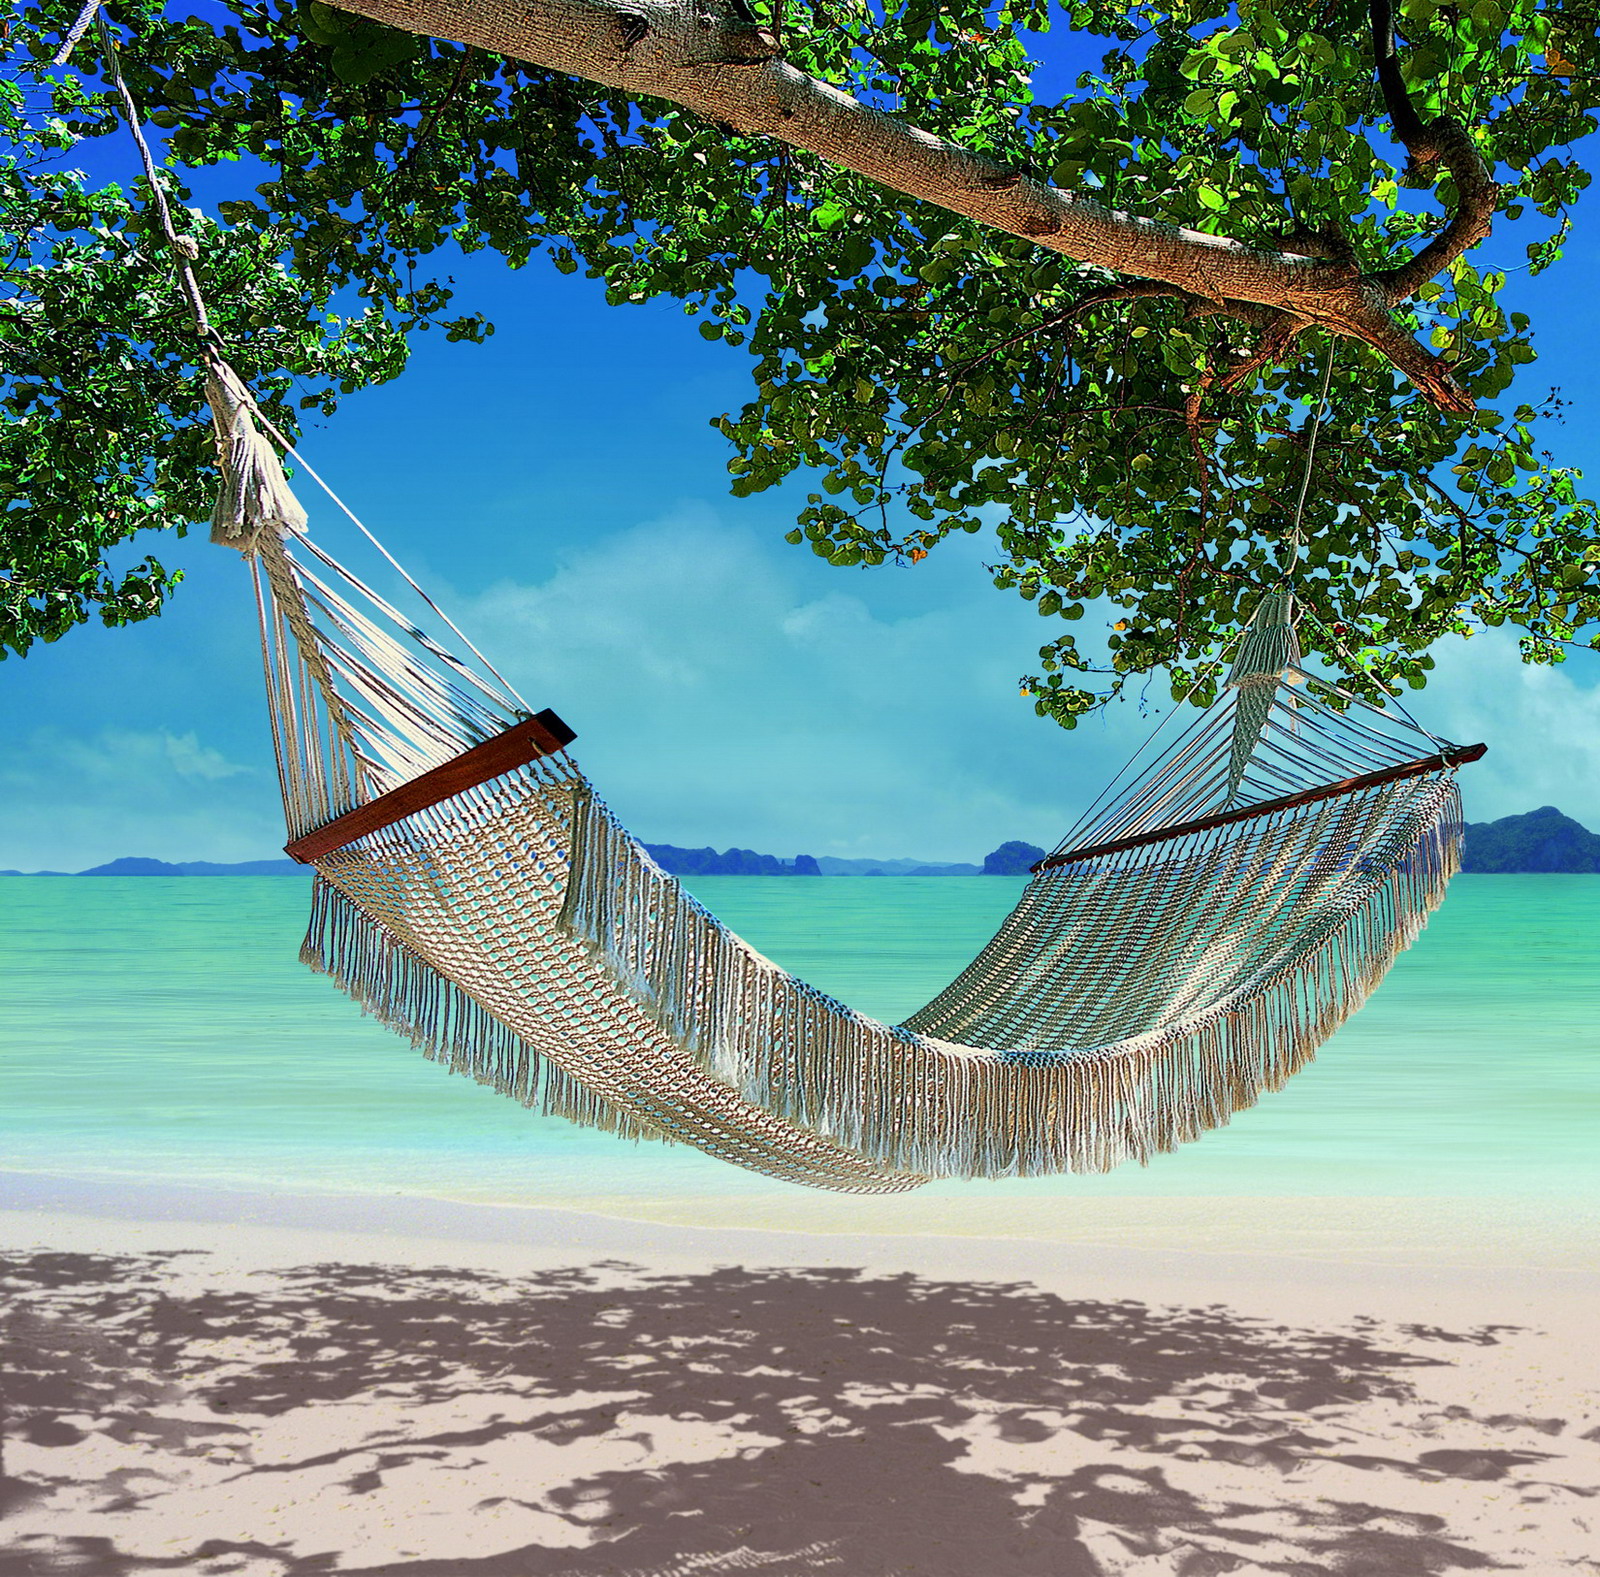 List 94+ Images picture of a hammock on a beach Full HD, 2k, 4k